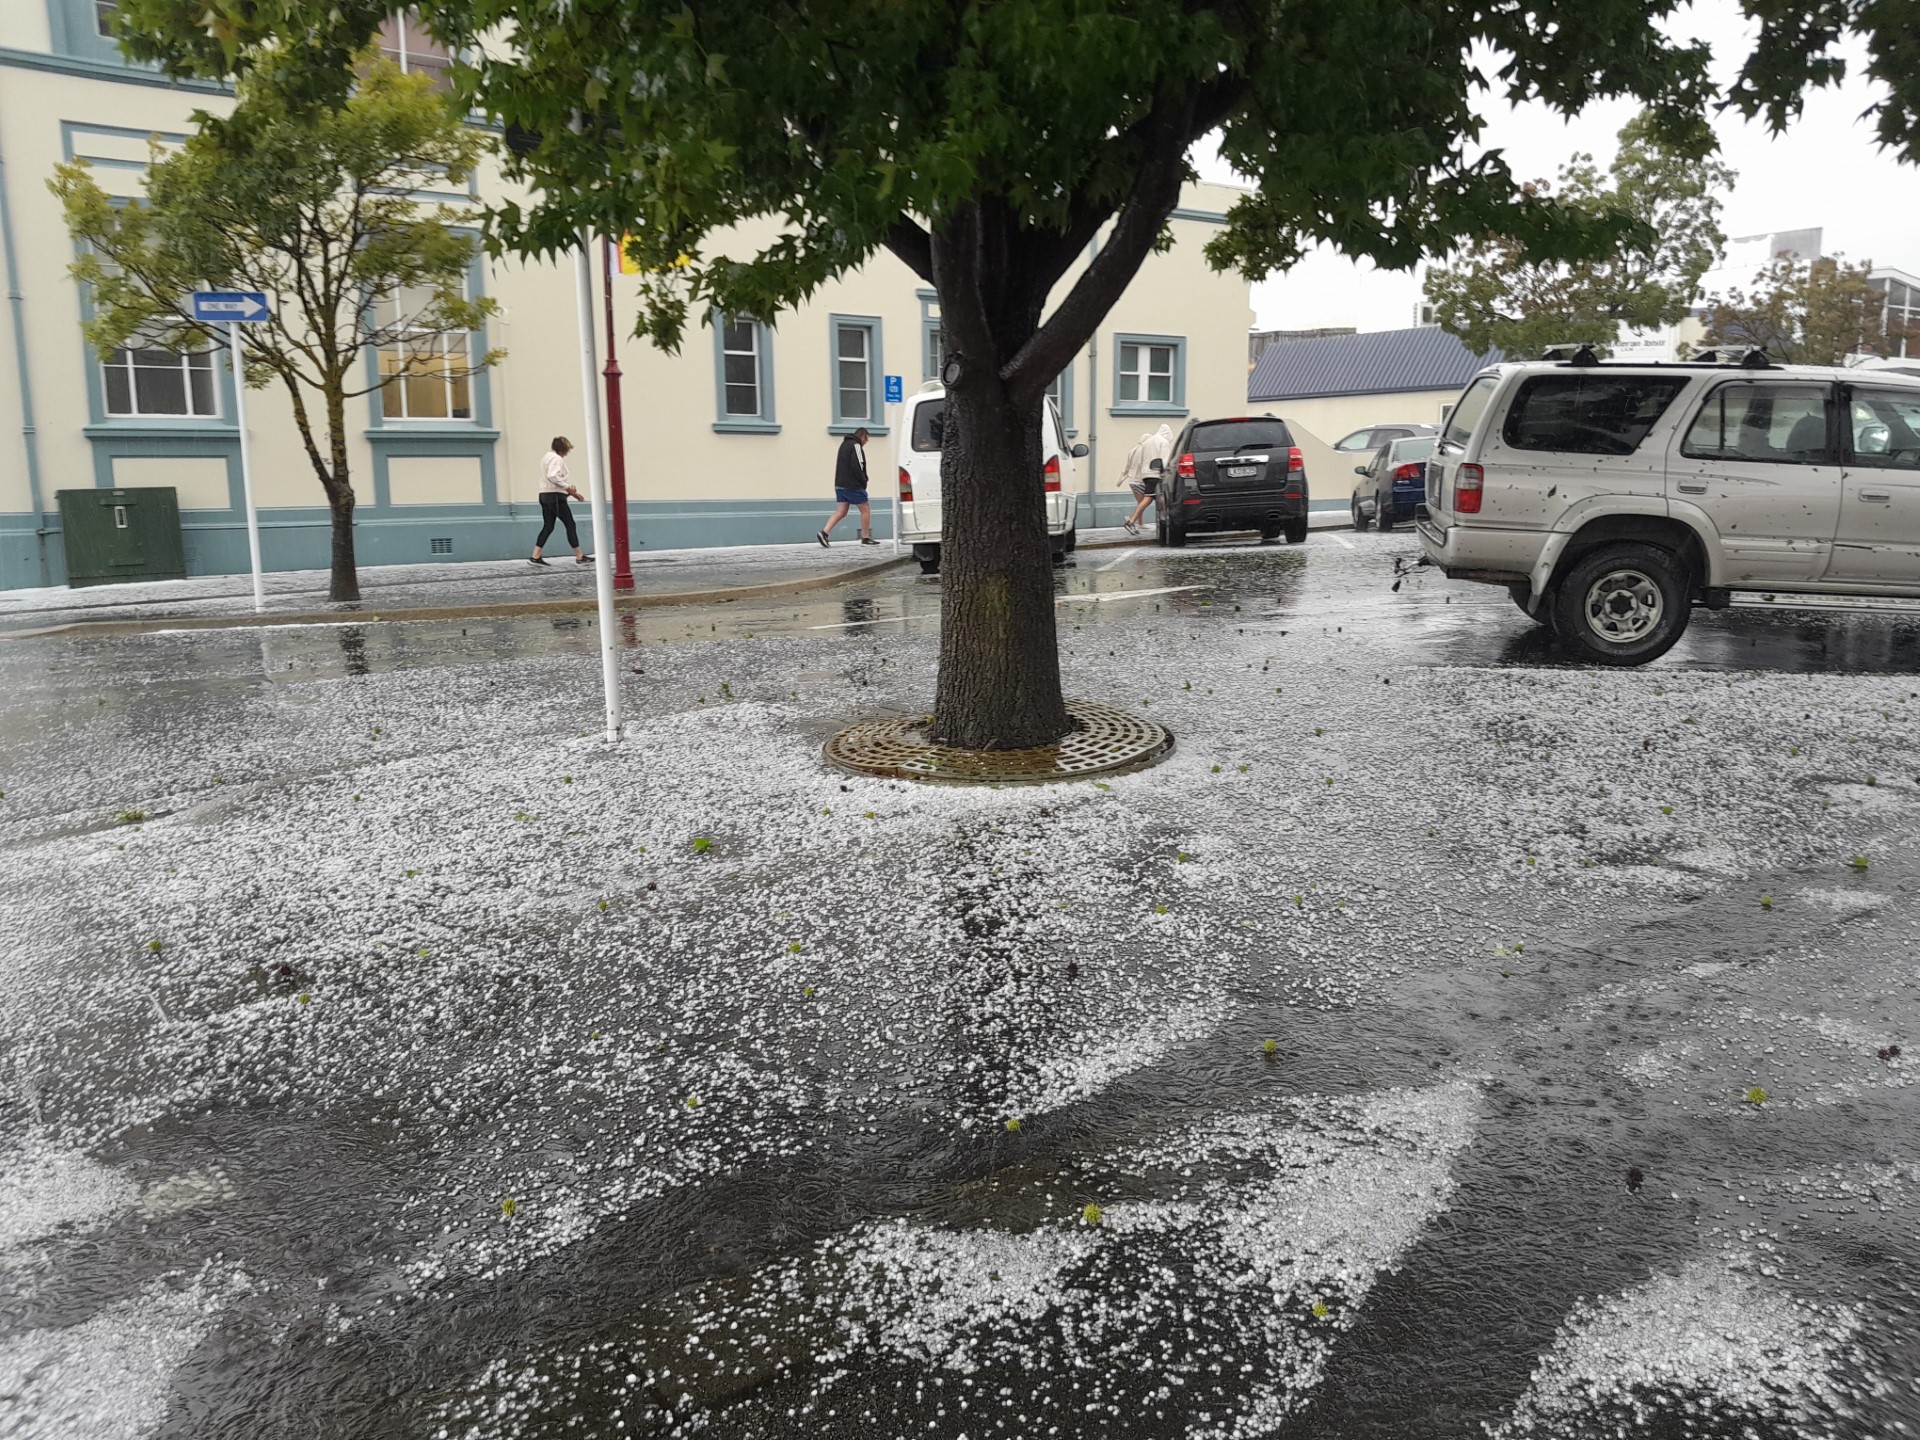 Pedestrians watch where they walk in Skird St after a hailstorm this afternoon. Photo: Ruby Shaw 